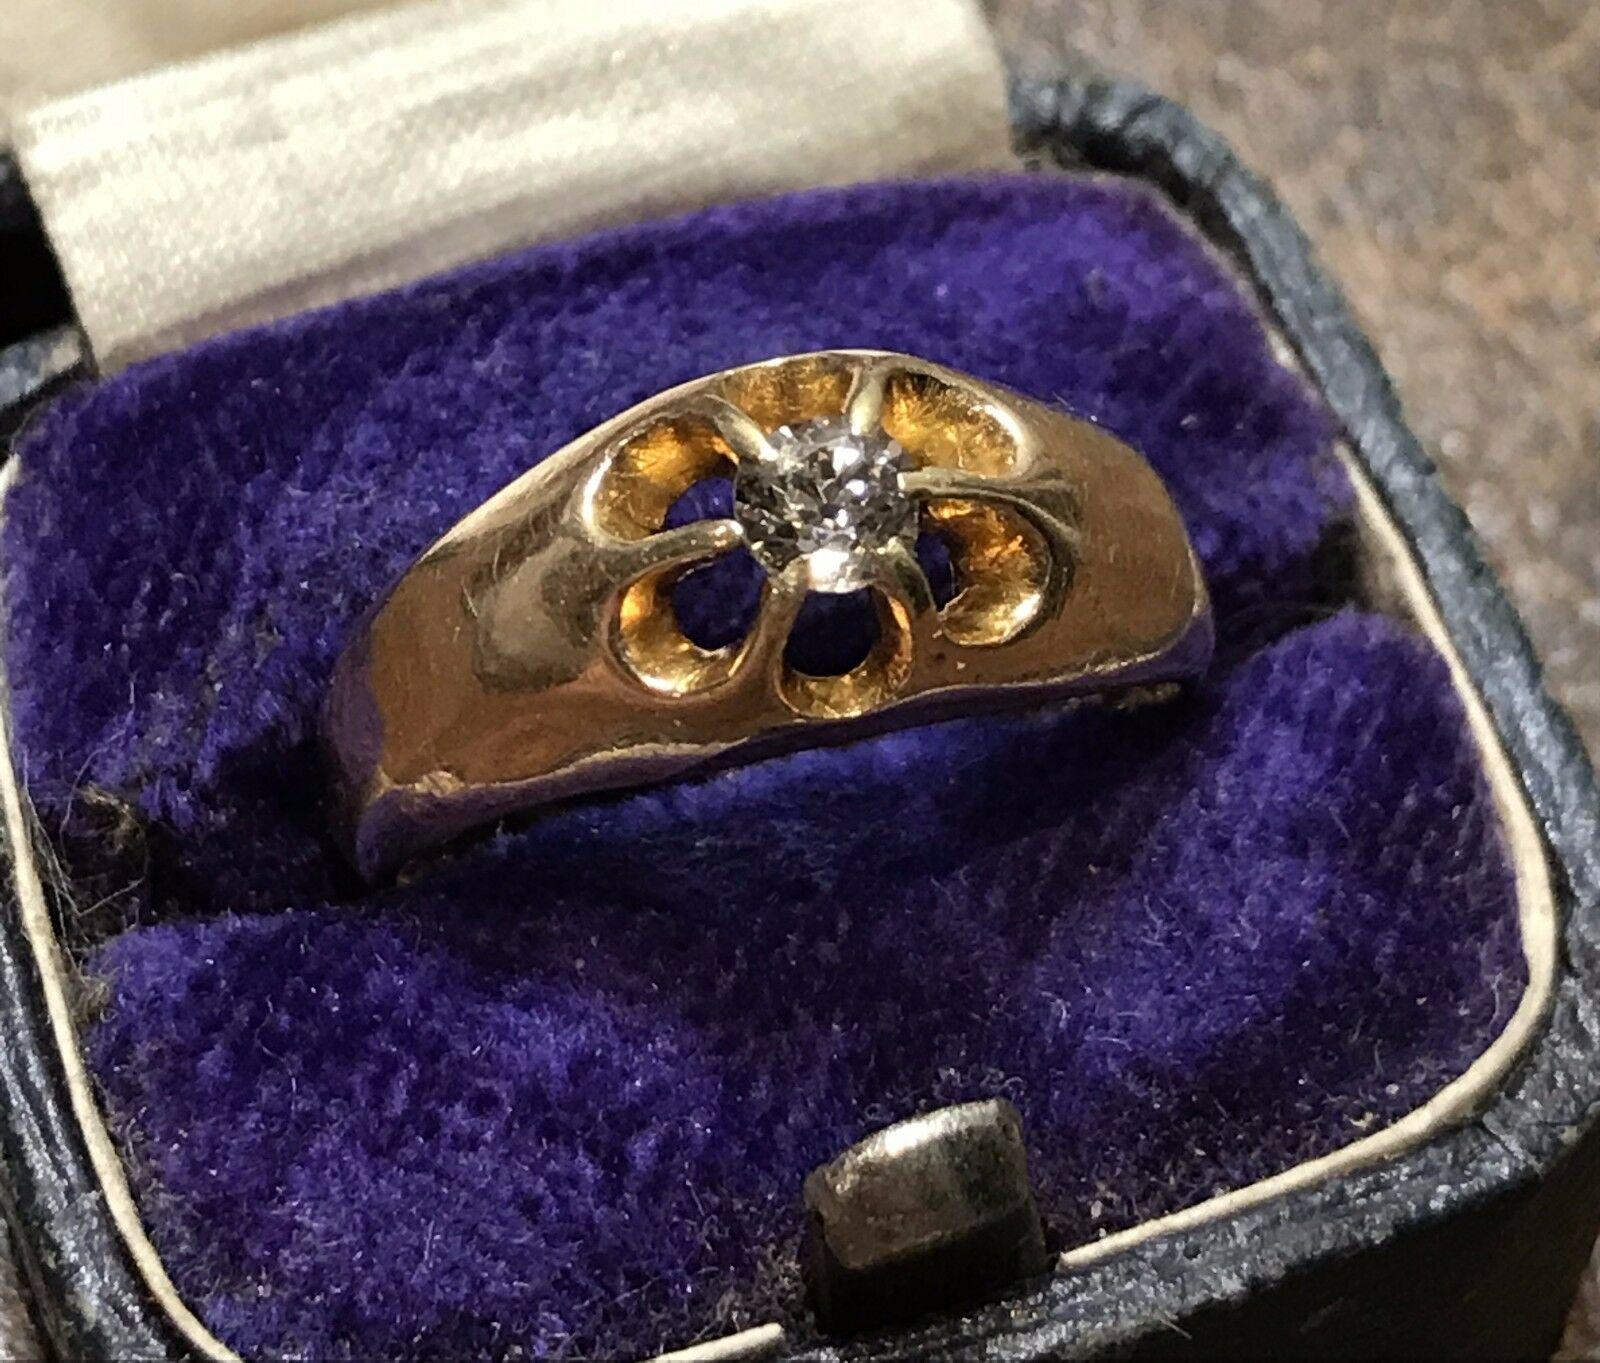 Wimbledon-Furniture 

Wimbledon-Furniture is delighted to offer for sale this lovely vintage Henry Griffith & sons 18ct Rose gold 0.20ct diamond ring

A lovely piece in excellent vintage condition throughout, the size is L and it is easily